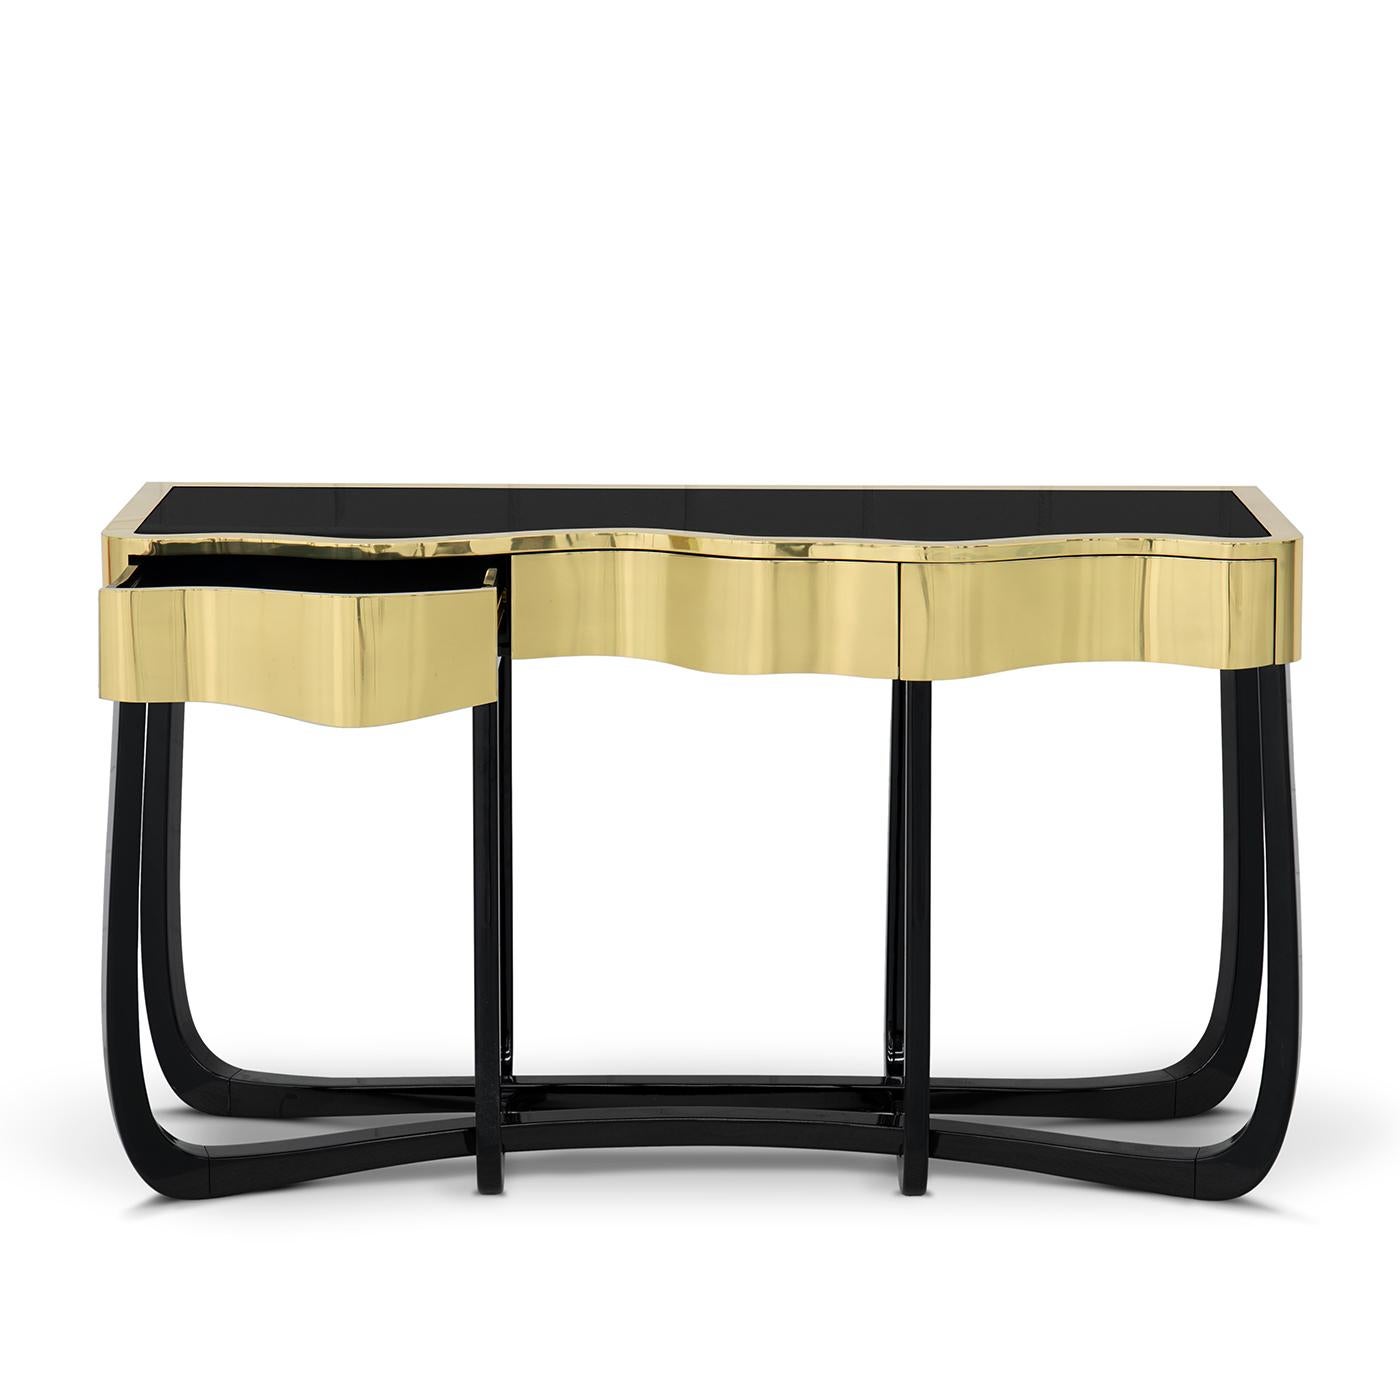 Console table curvy gold with polished brass golded finish 
top structure and with black glass flat top. With mahogany legs 
in black lacquered finish.
Also available in patinated brass top finish or copper finish,
with mahogany legs in black